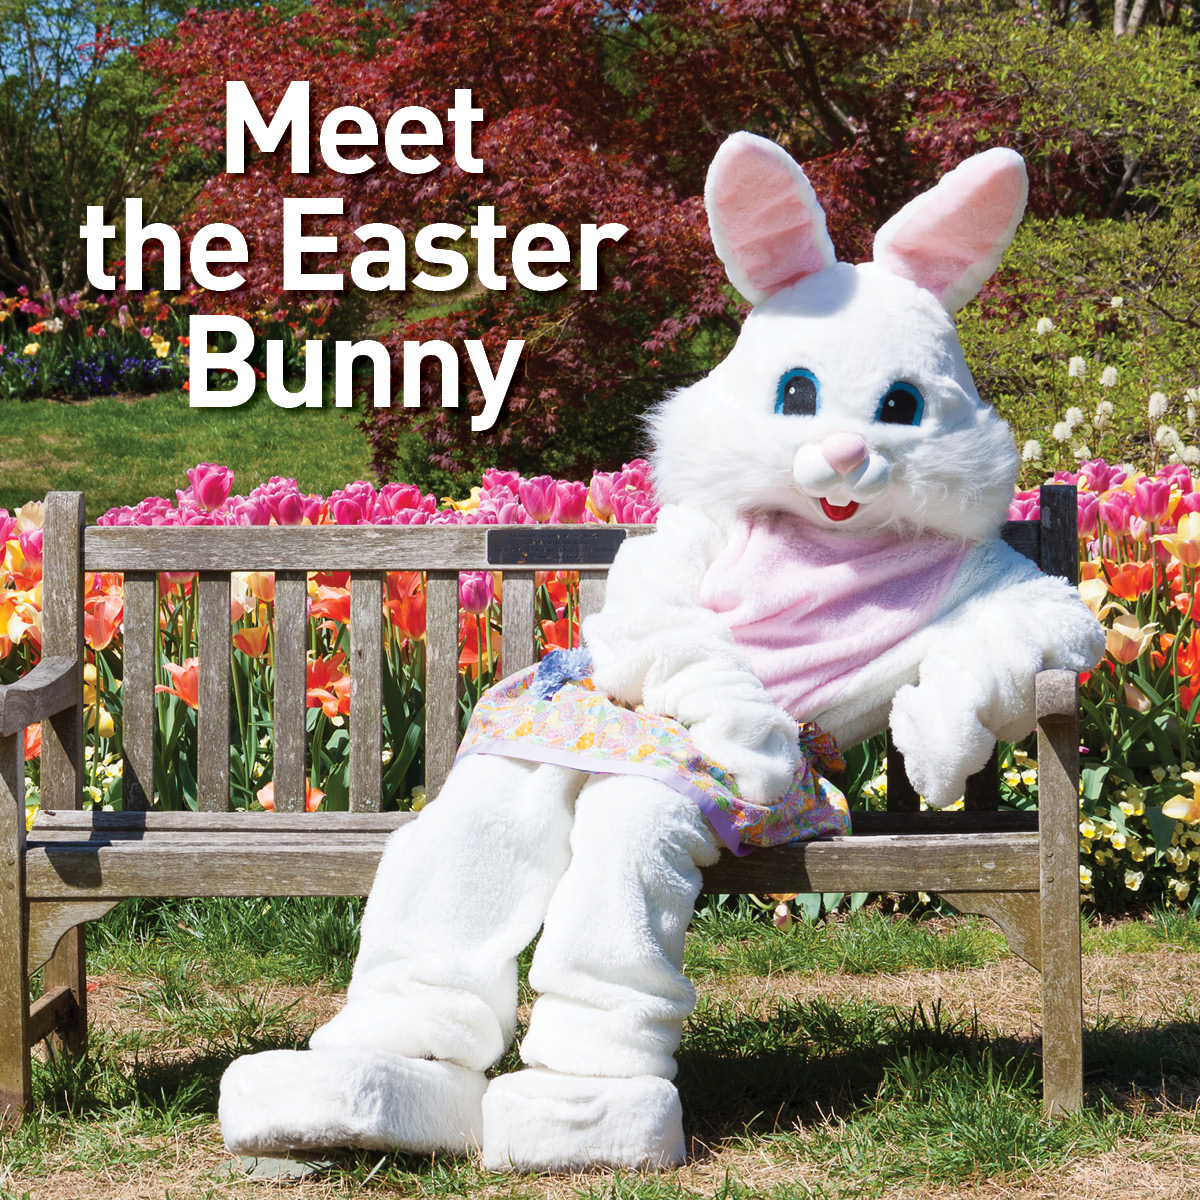 photo of the Easter Bunny sitting on a bench with tulips blooming and the words Meet the Easter Bunny